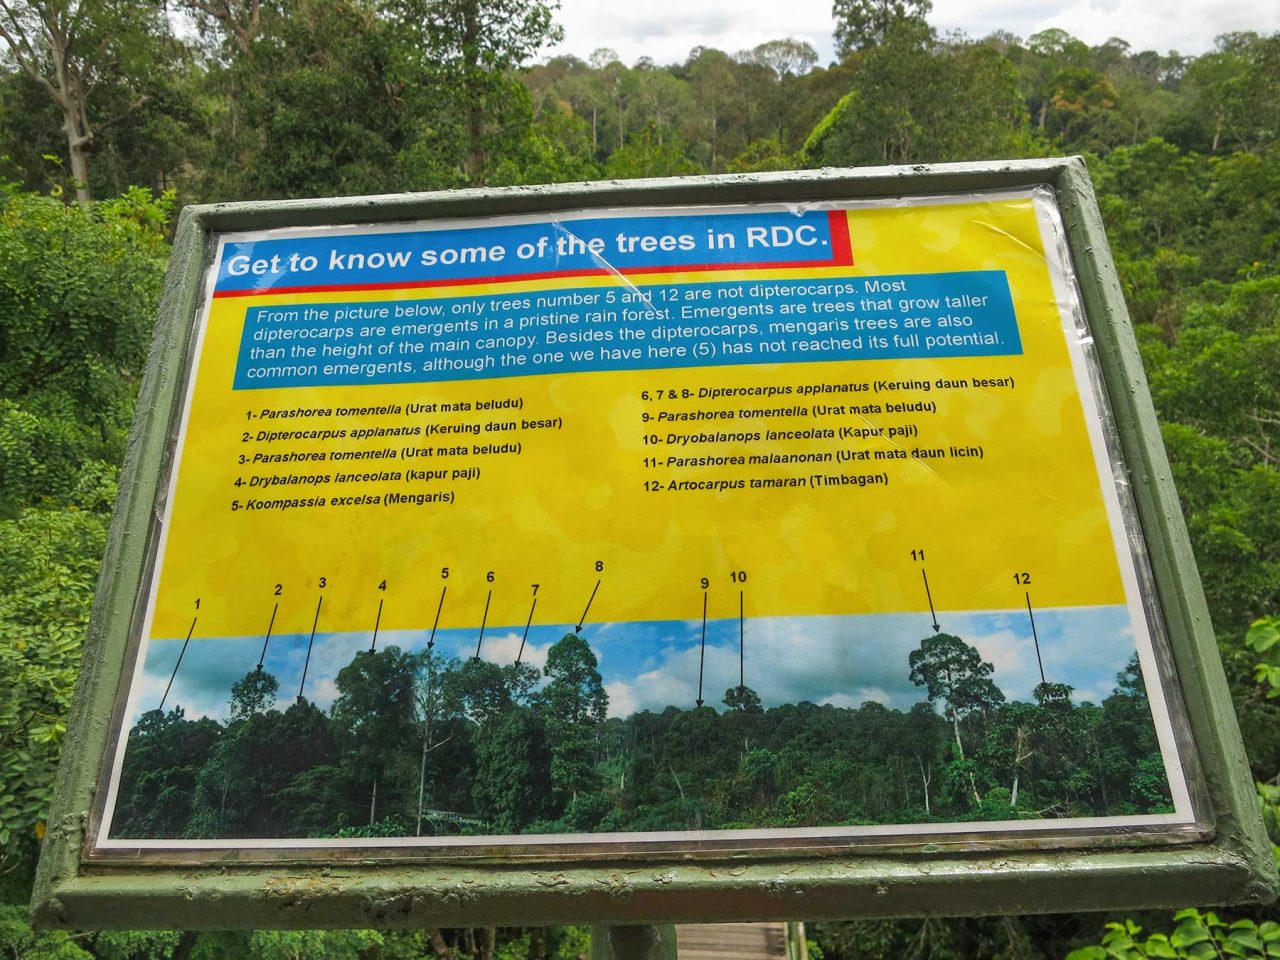 Information board about the tall rainforest trees around this area